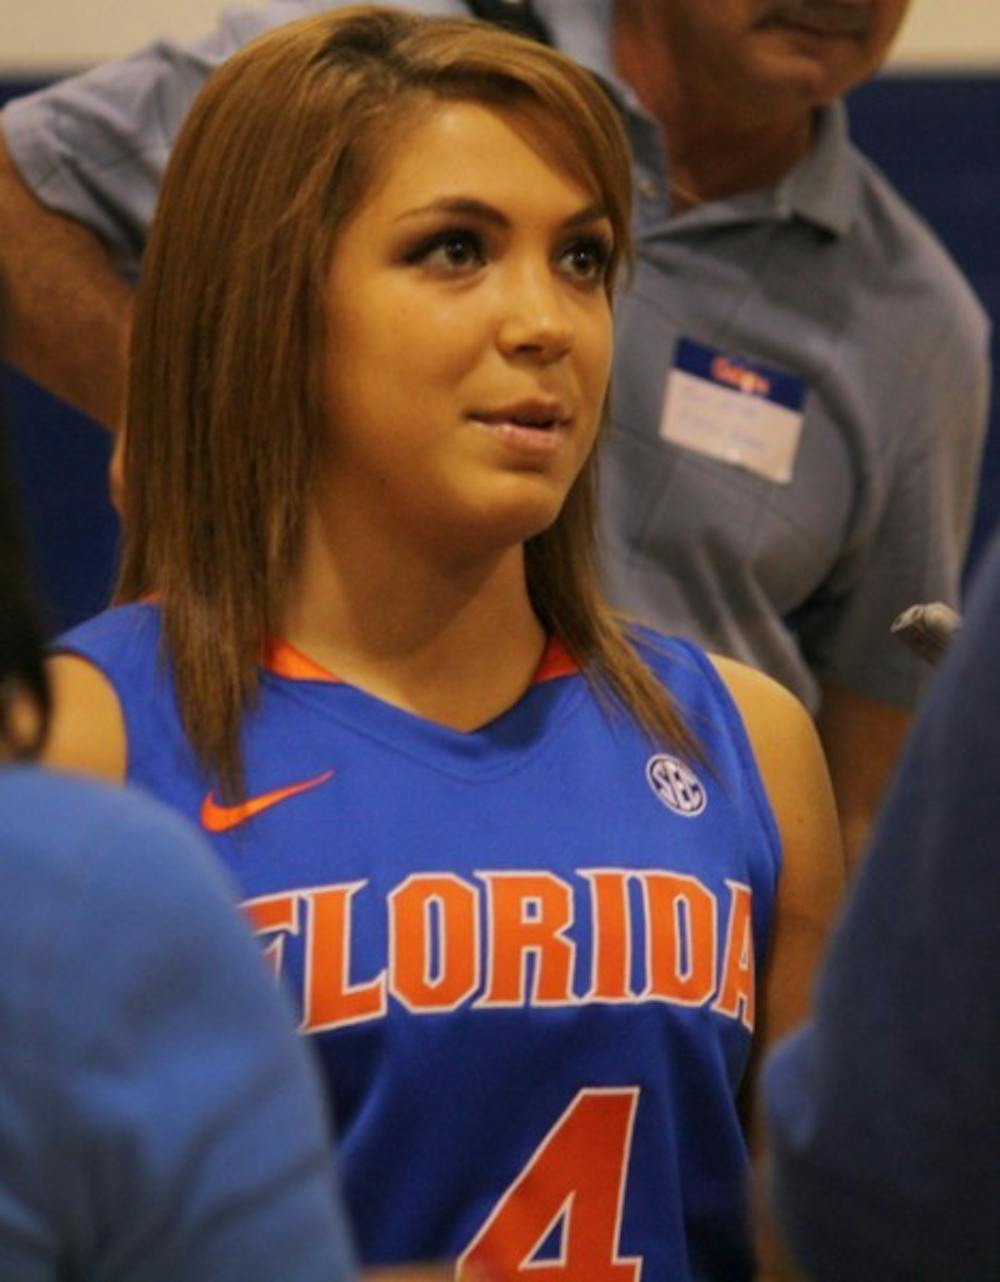 <p>Florida redshirt freshman Carlie Needles talks to the media before last season. Needles, coming off an ACL tear last season, made a school record nine three-pointers against North Florida on Monday night in the Stephen C. O'Connell Center. Florida won 74-44.</p>